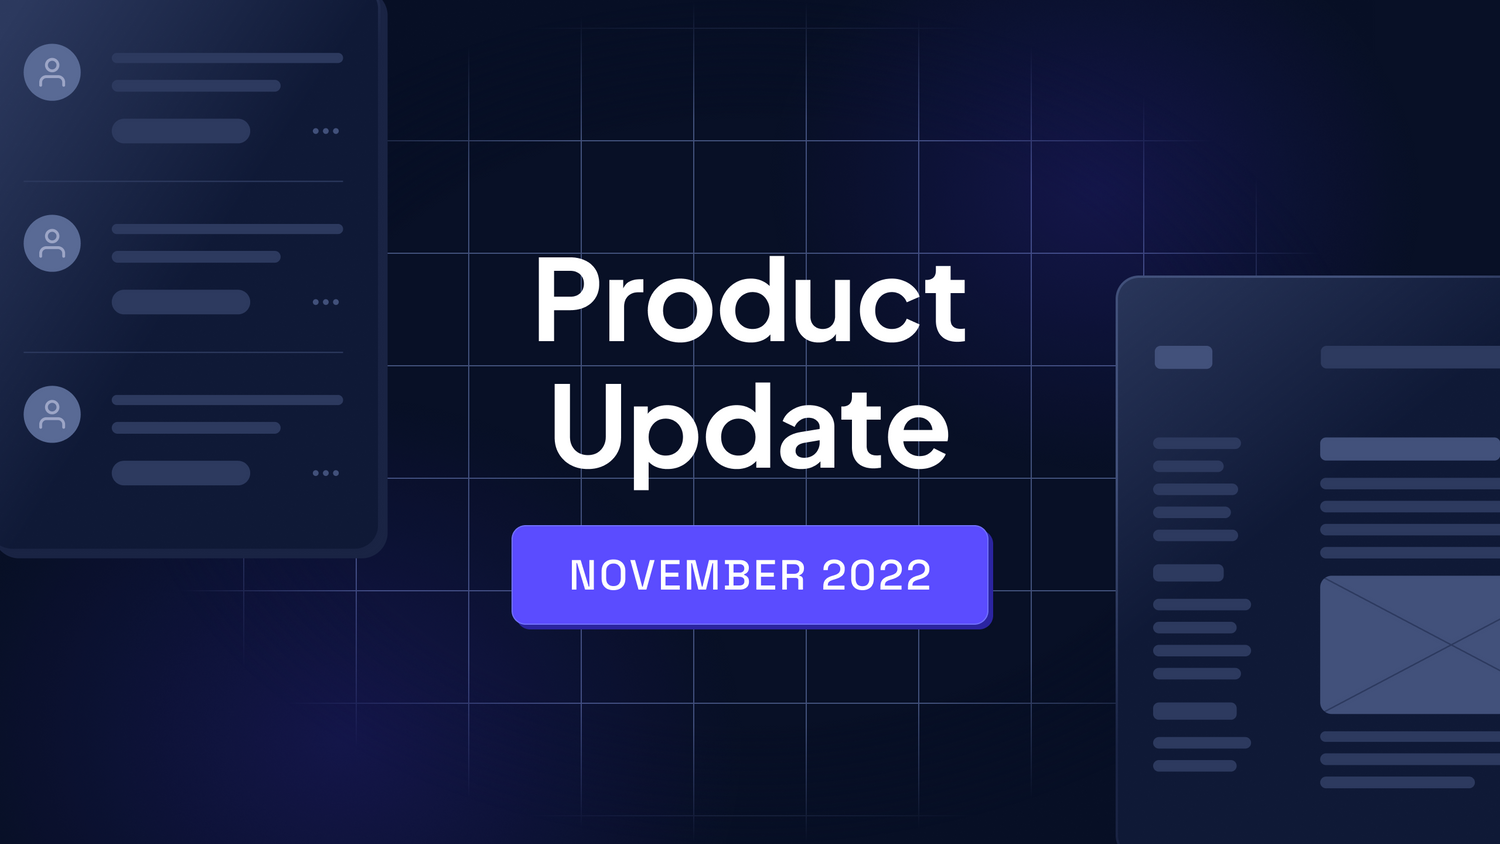 A visual representation of the Hygraph Product Update for November 2022